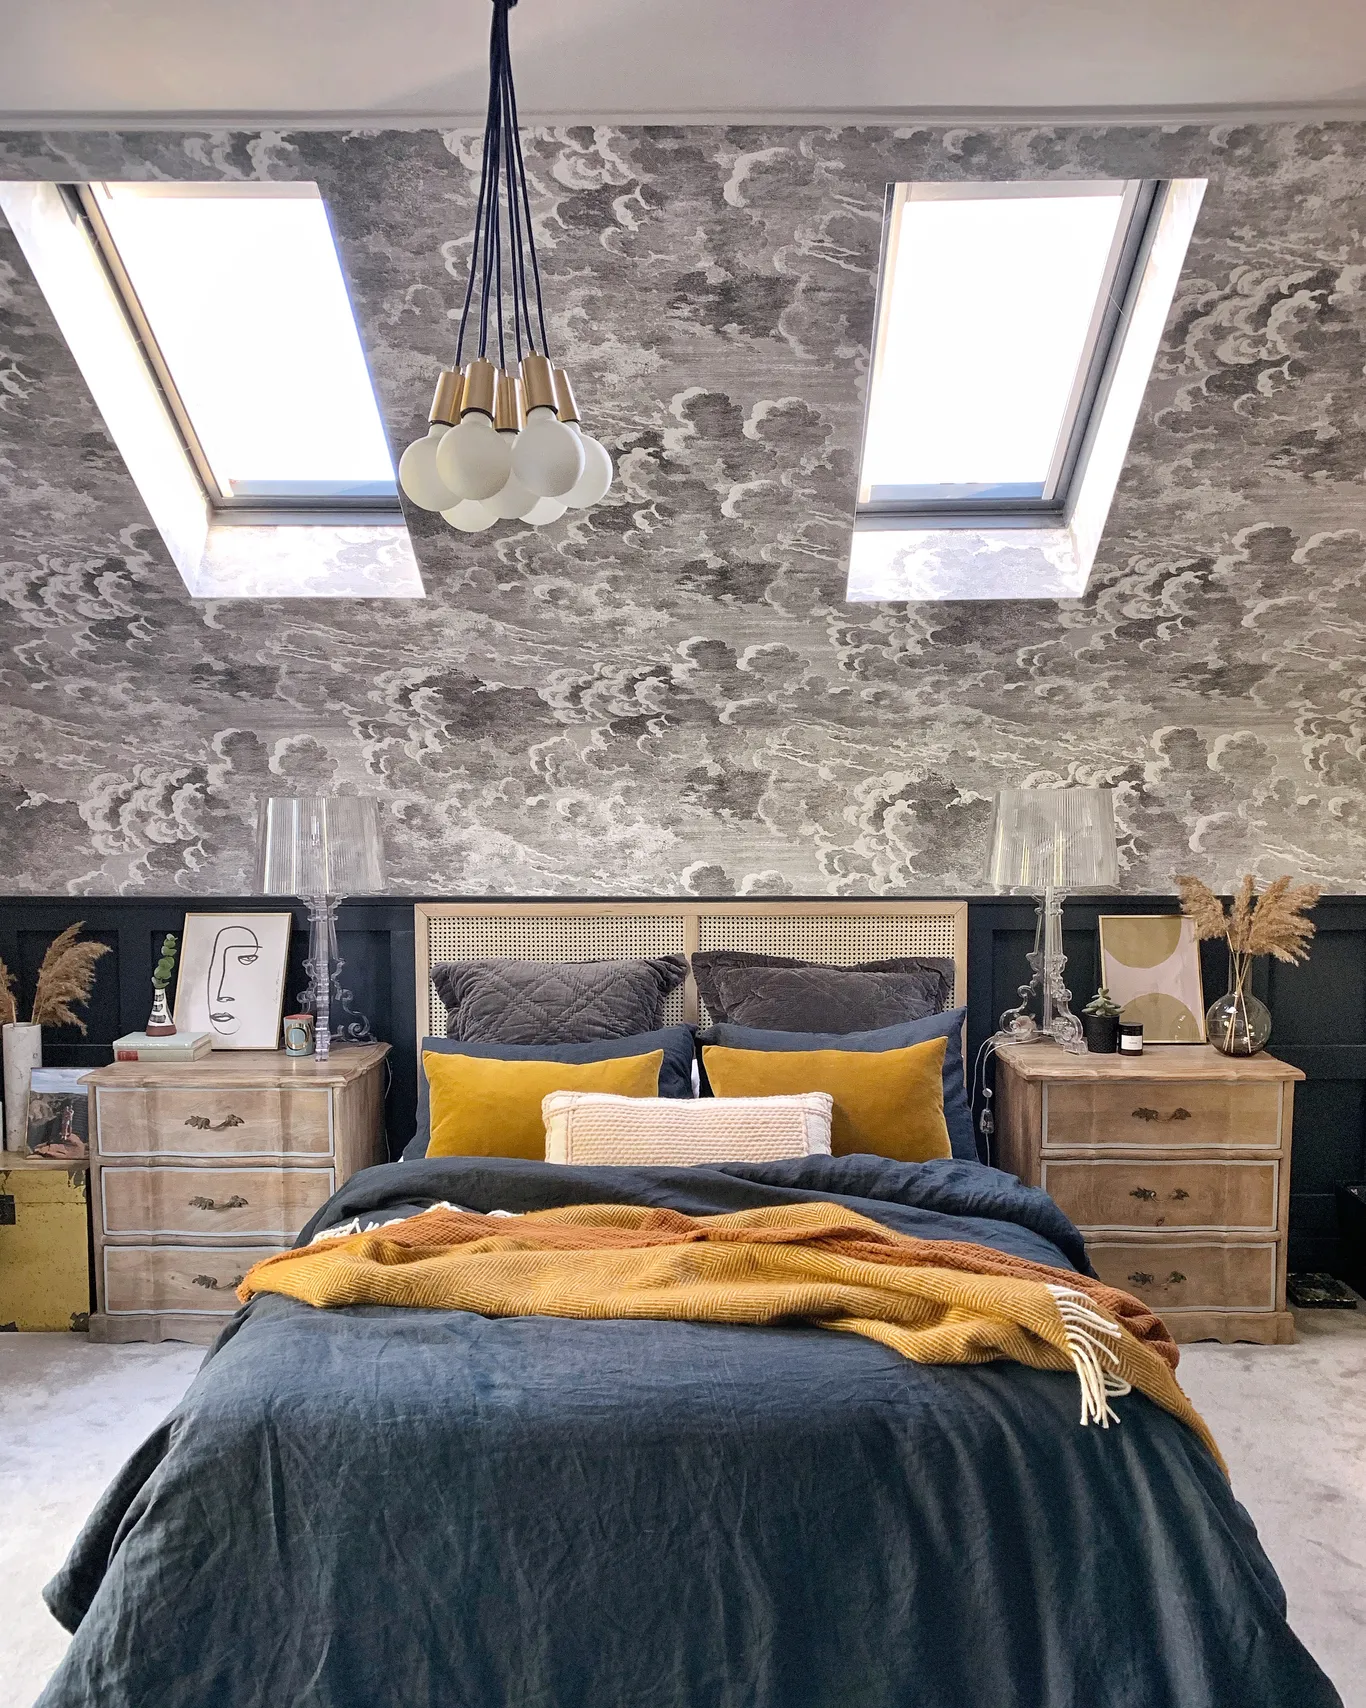 5 attic bedrooms to swoon over